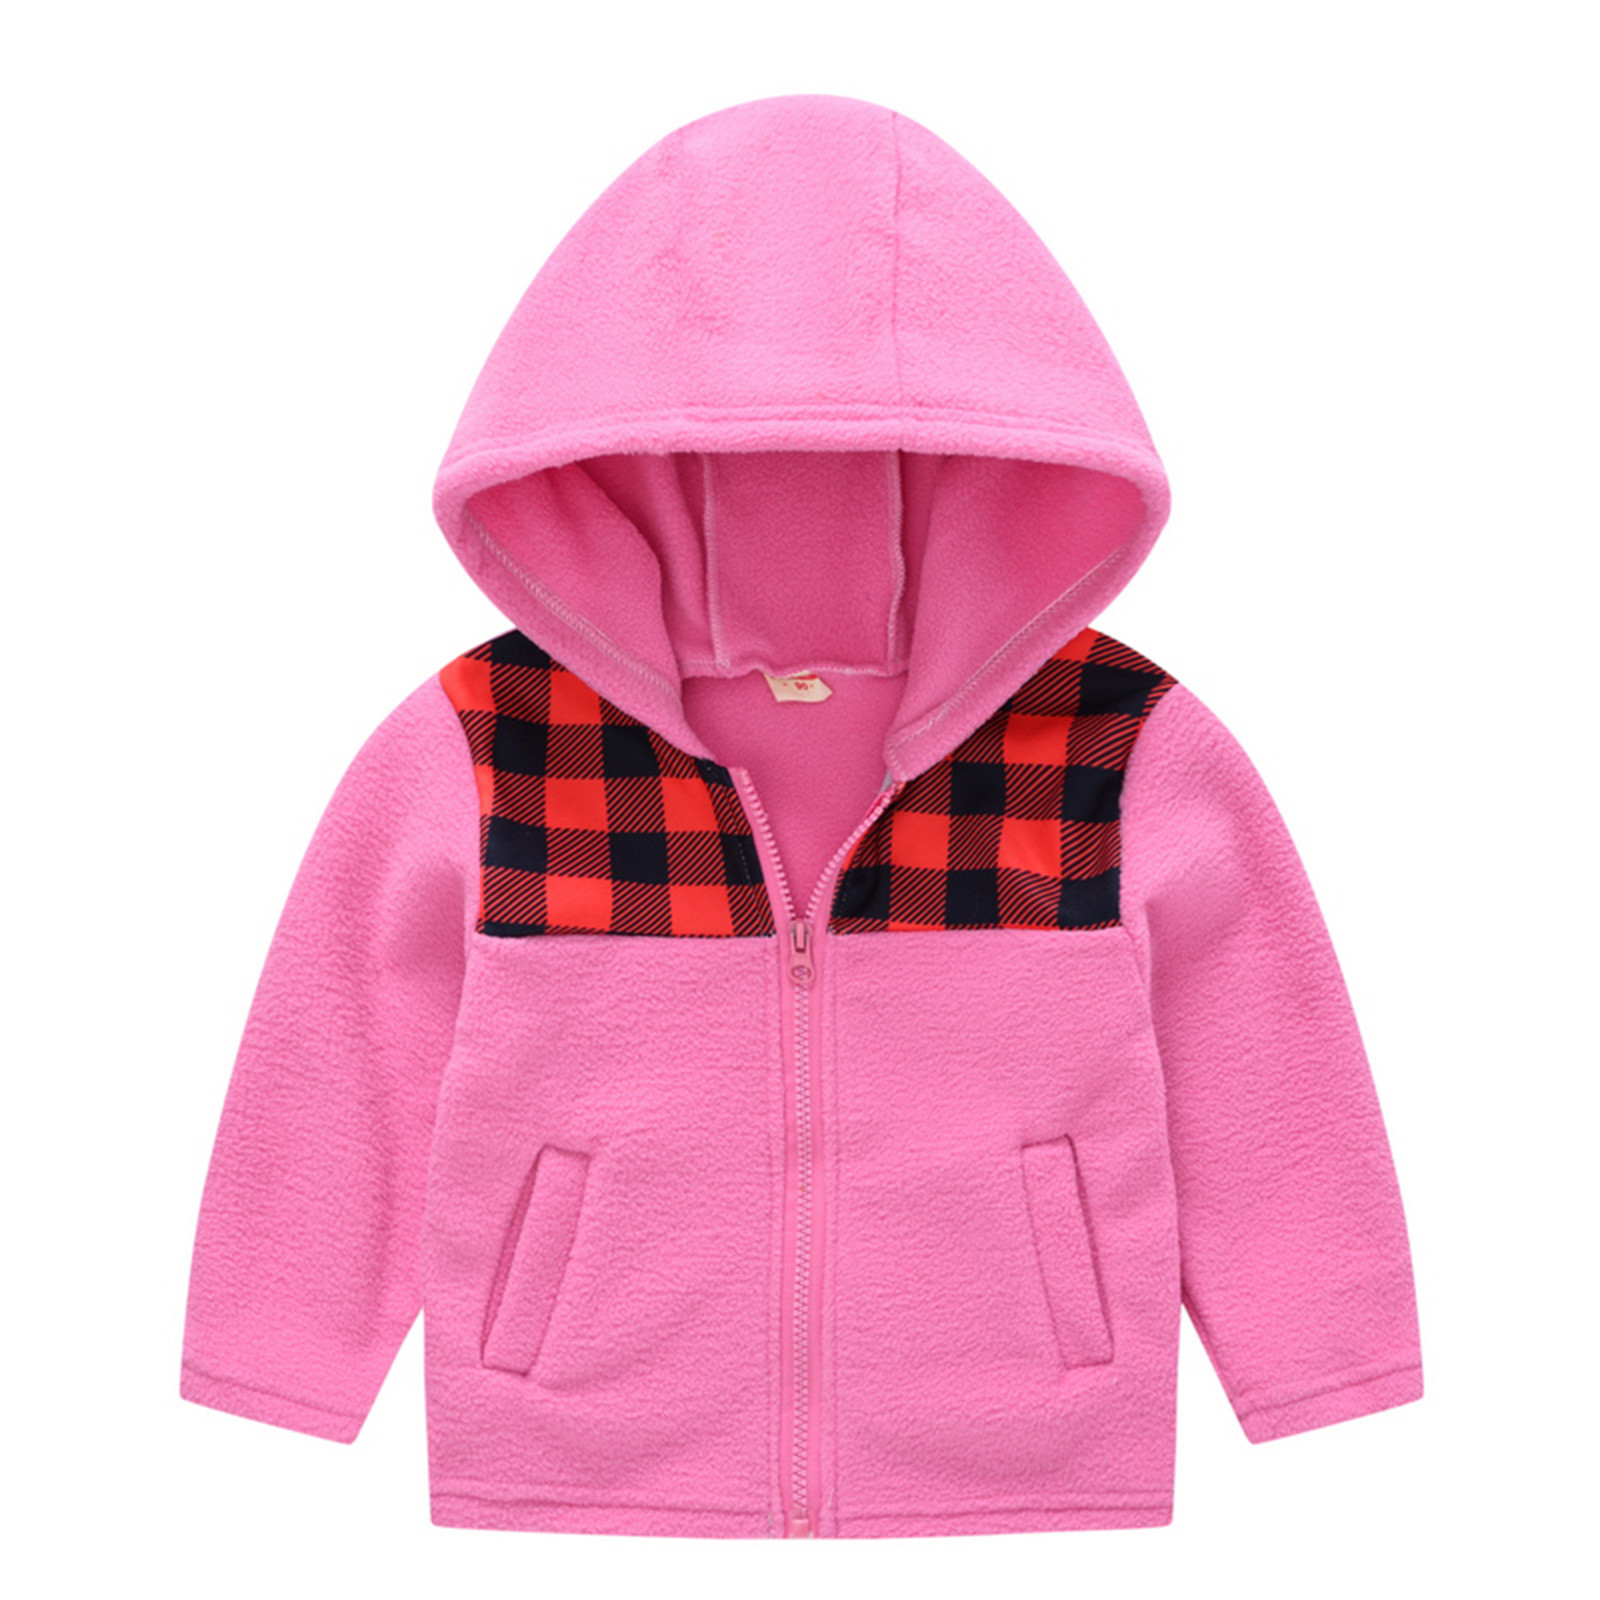 Baby Toddler Kids Boy Girl Solid Casual Pocket Hoodie Sweatershirt Pullover 